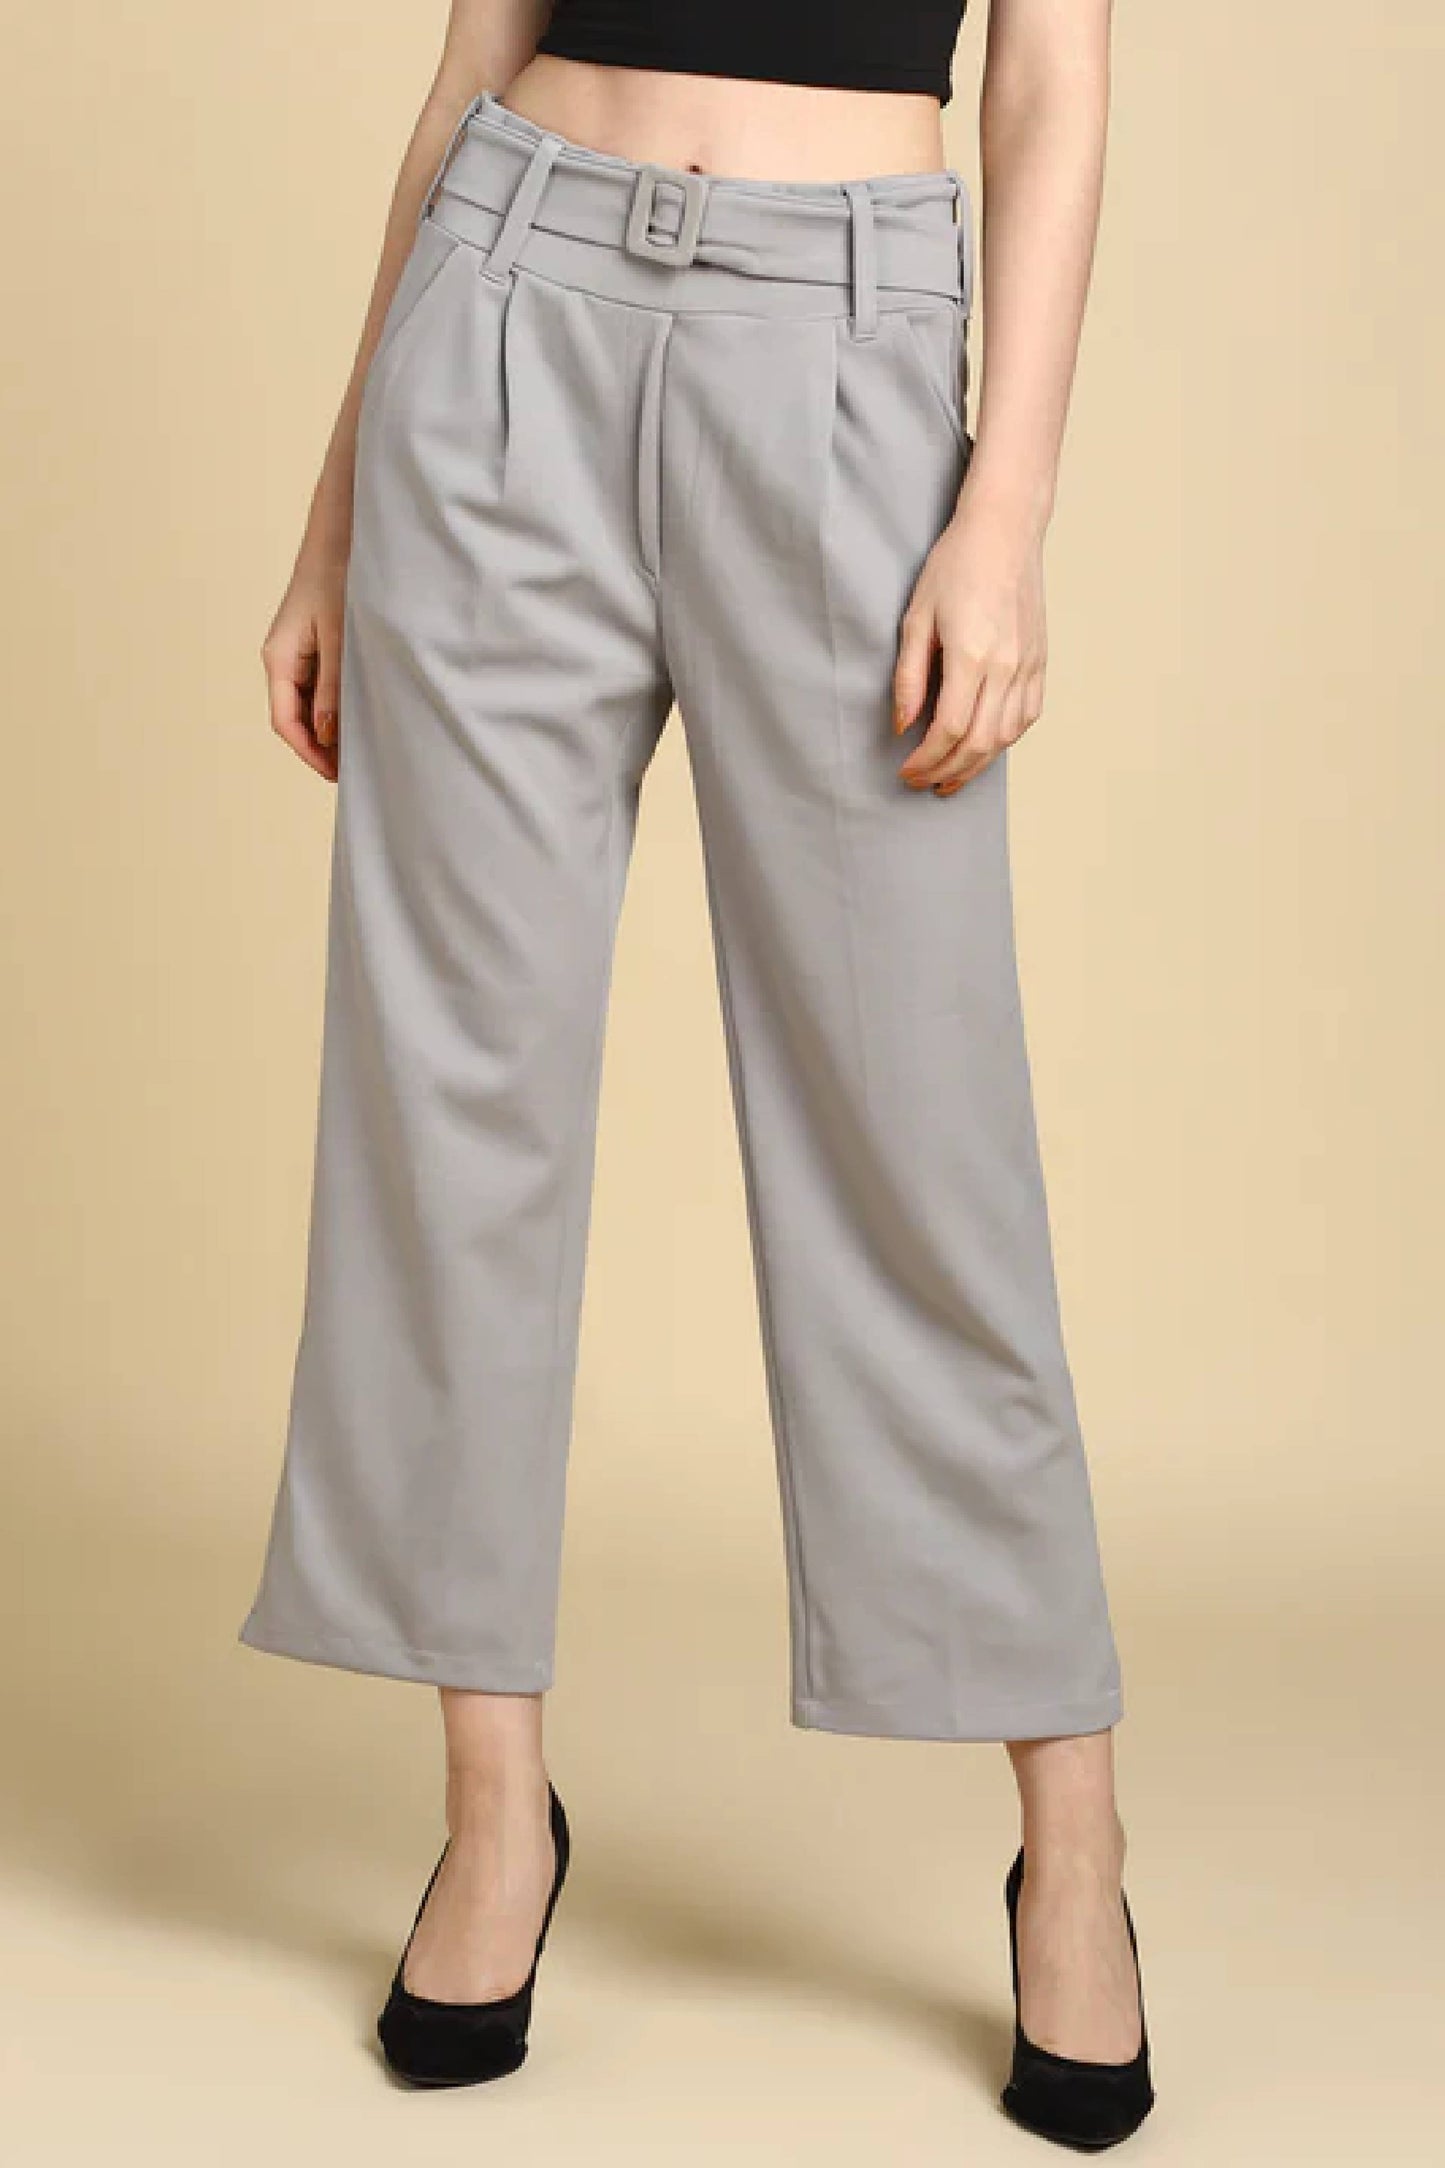 Wide Leg Formal Trouser Pant with Belt For Women